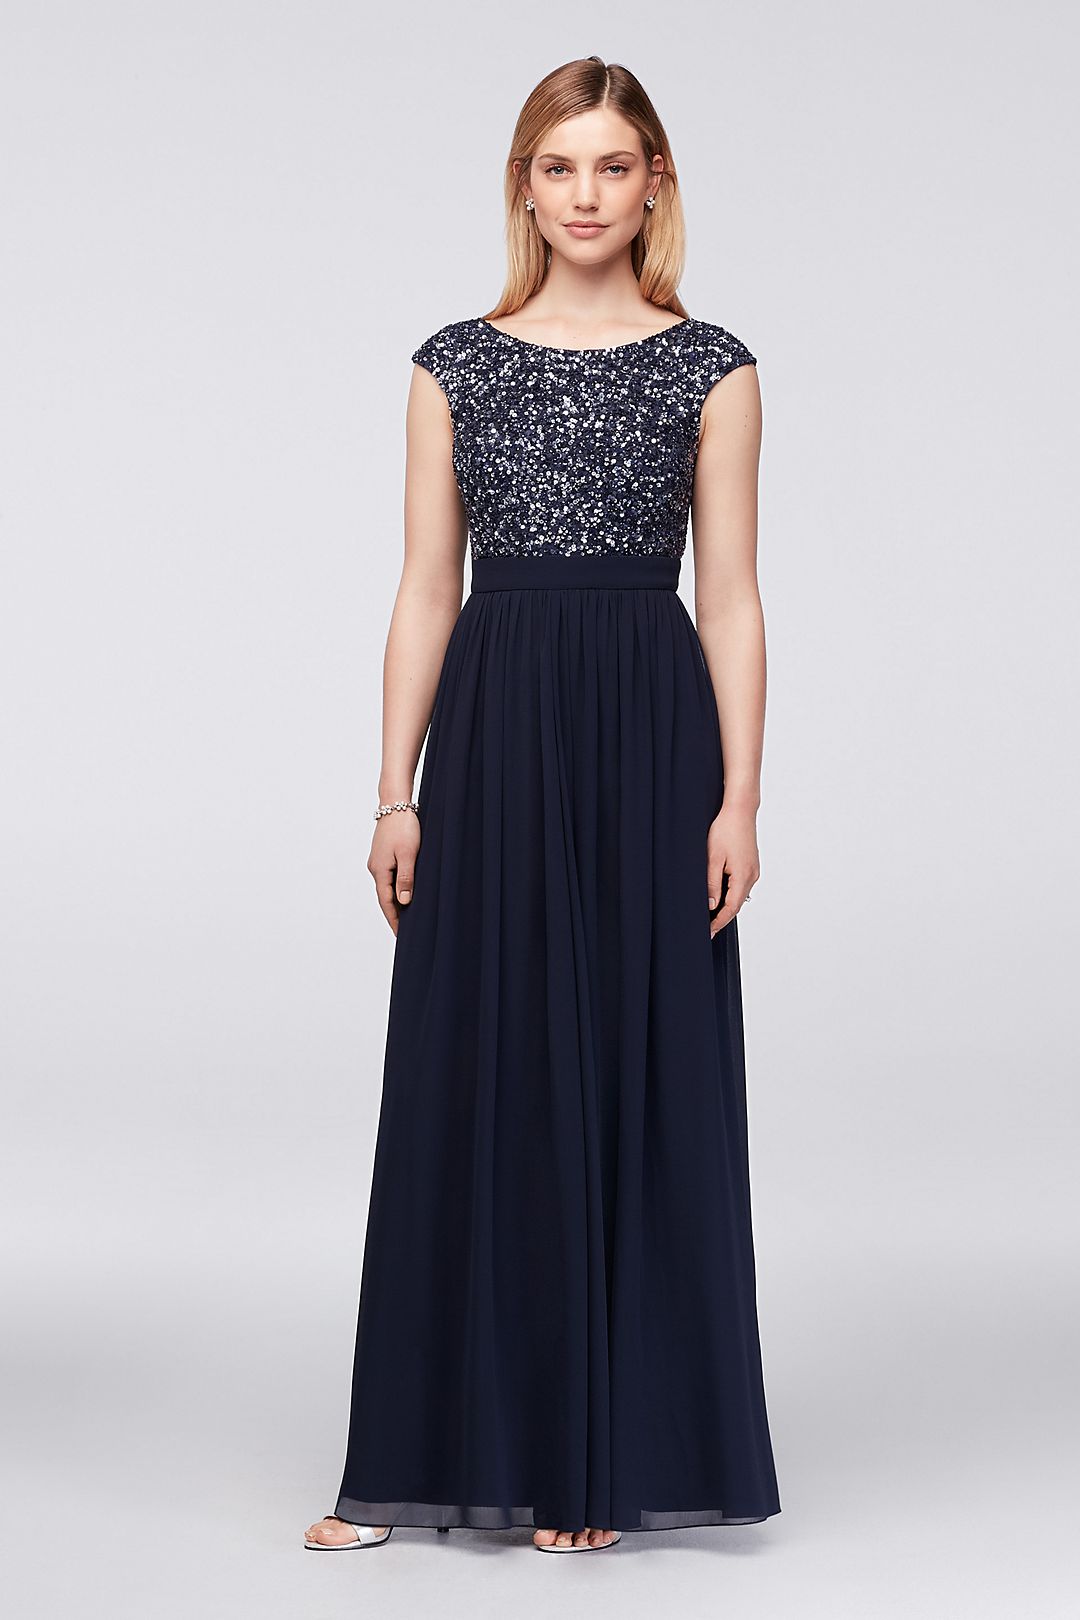 Hand-Beaded Cap Sleeve Gown with Georgette Skirt Image 1